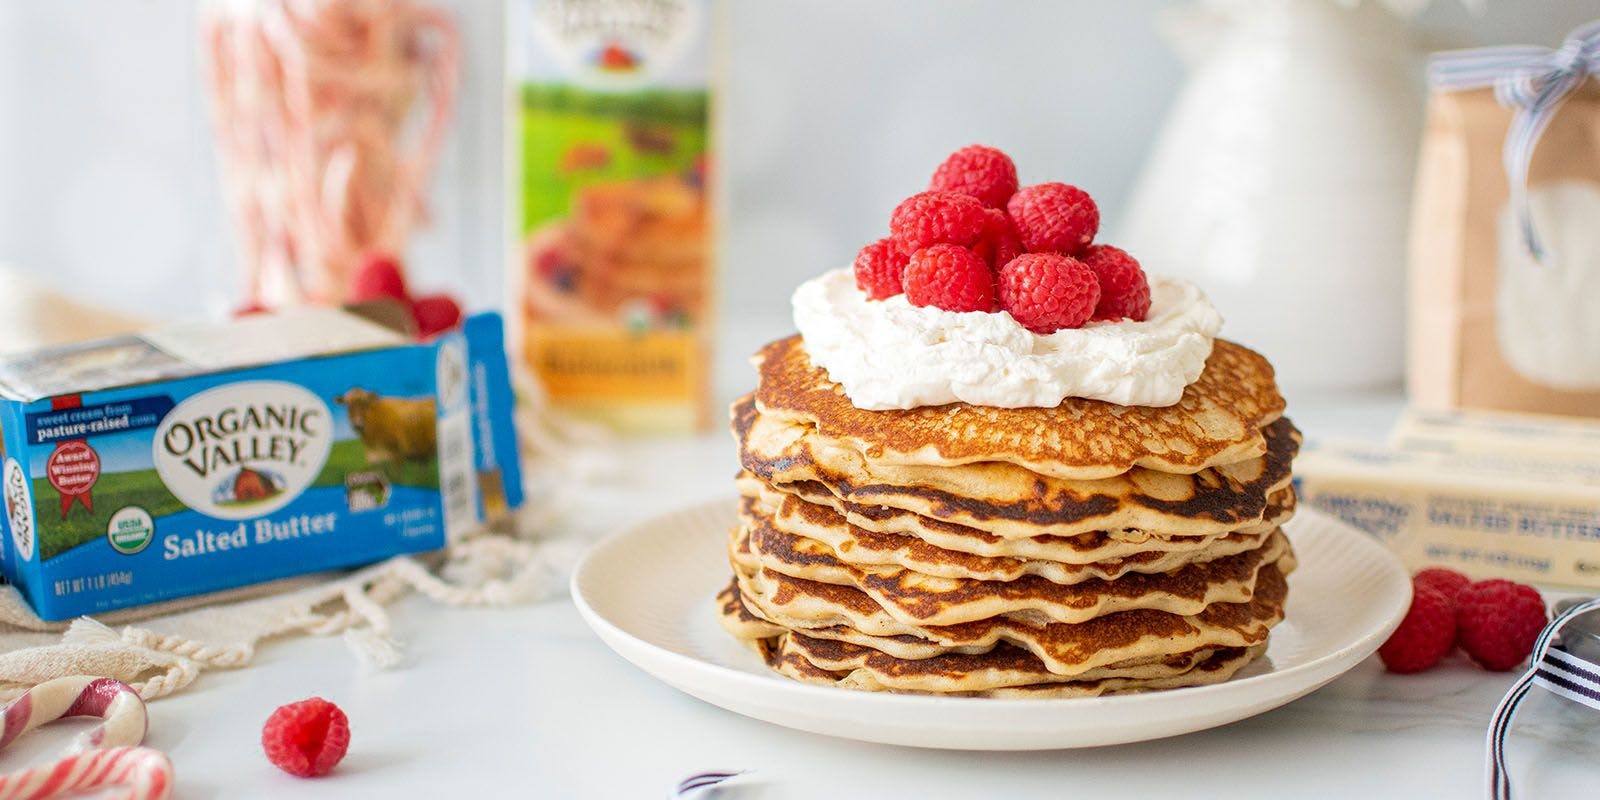 Pancakes with whipped cream and raspberries.